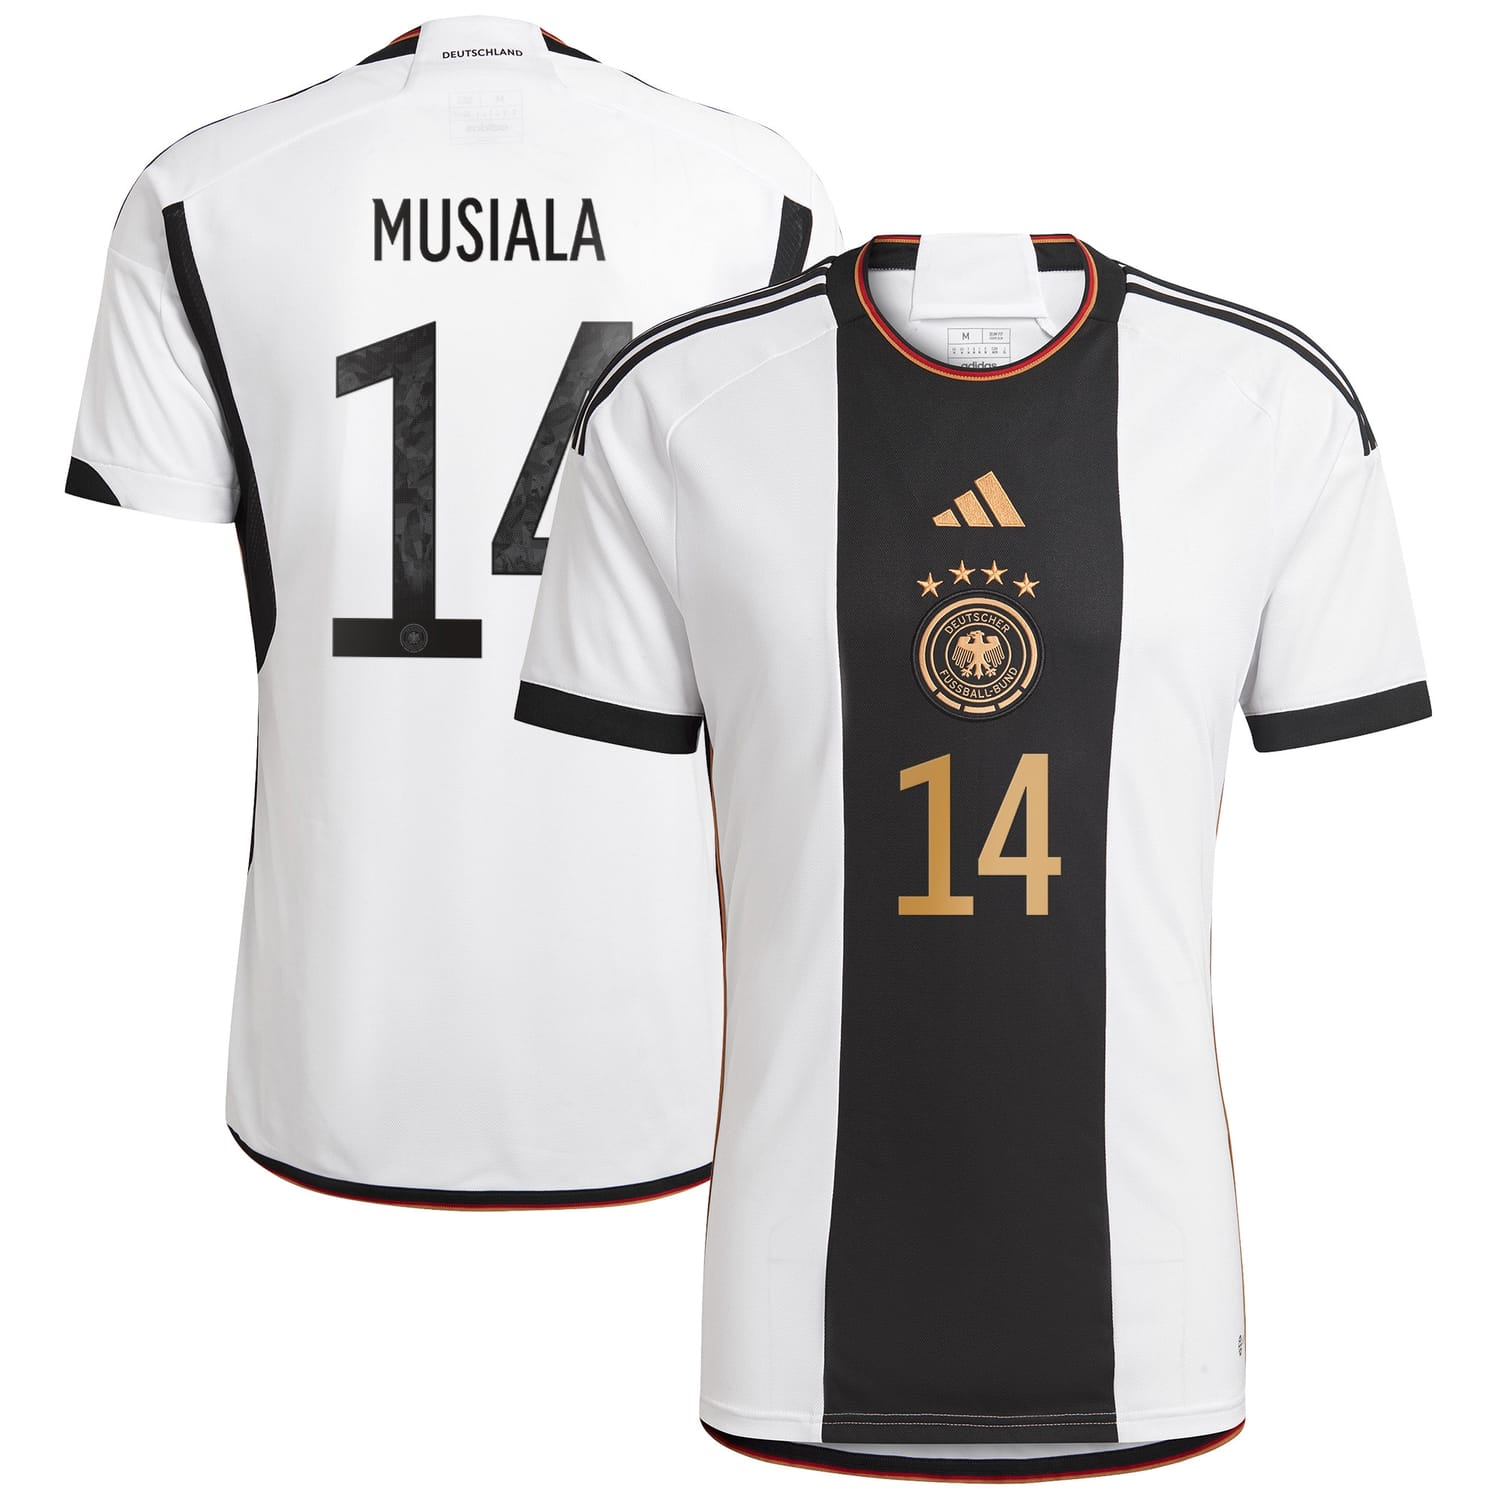 Germany National Team Home Jersey Shirt player Jamal Musiala 14 printing for Men